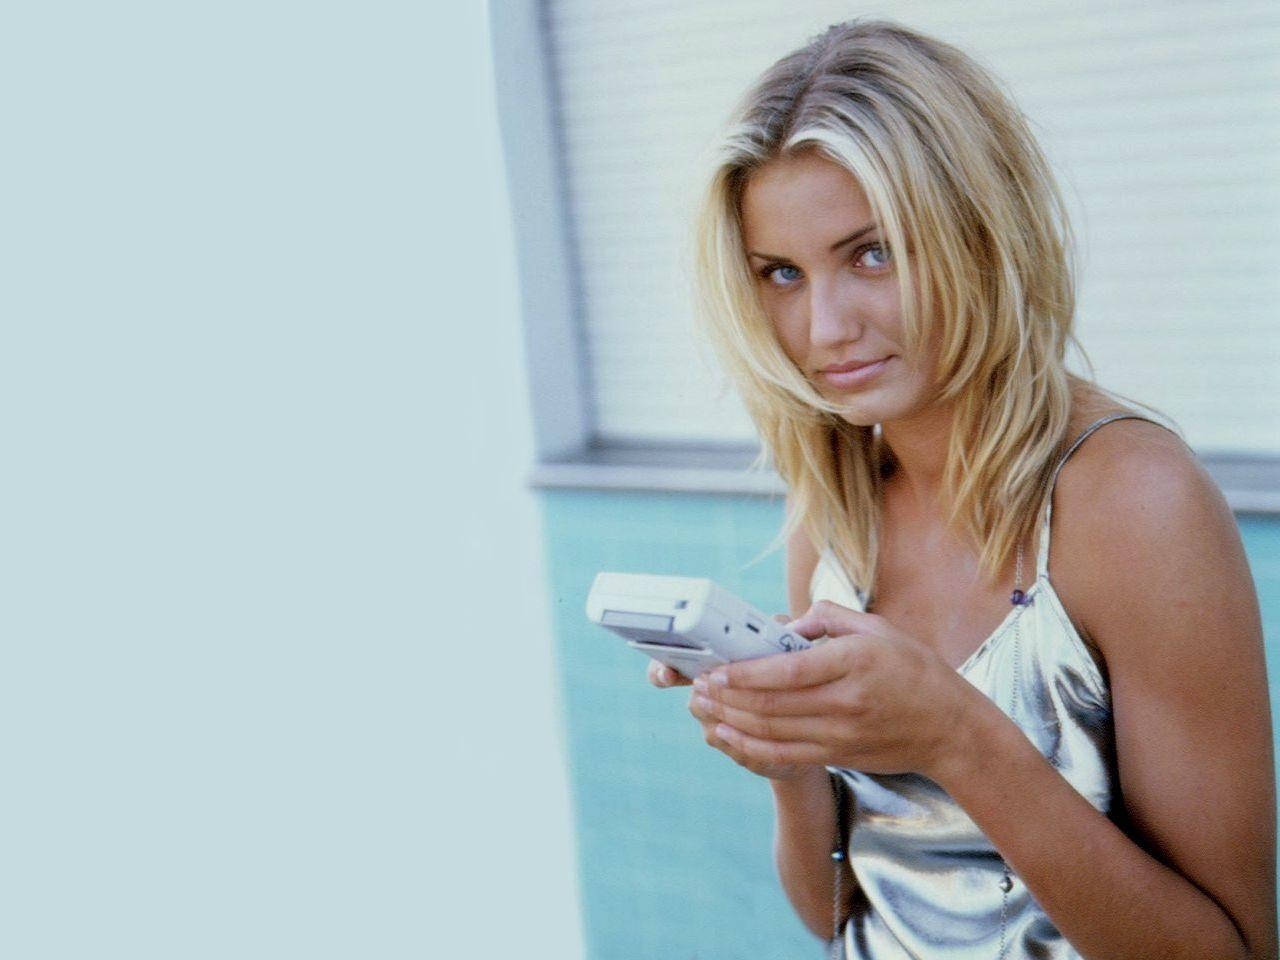 Cameron Diaz Engaged In A Call On A White Smartphone